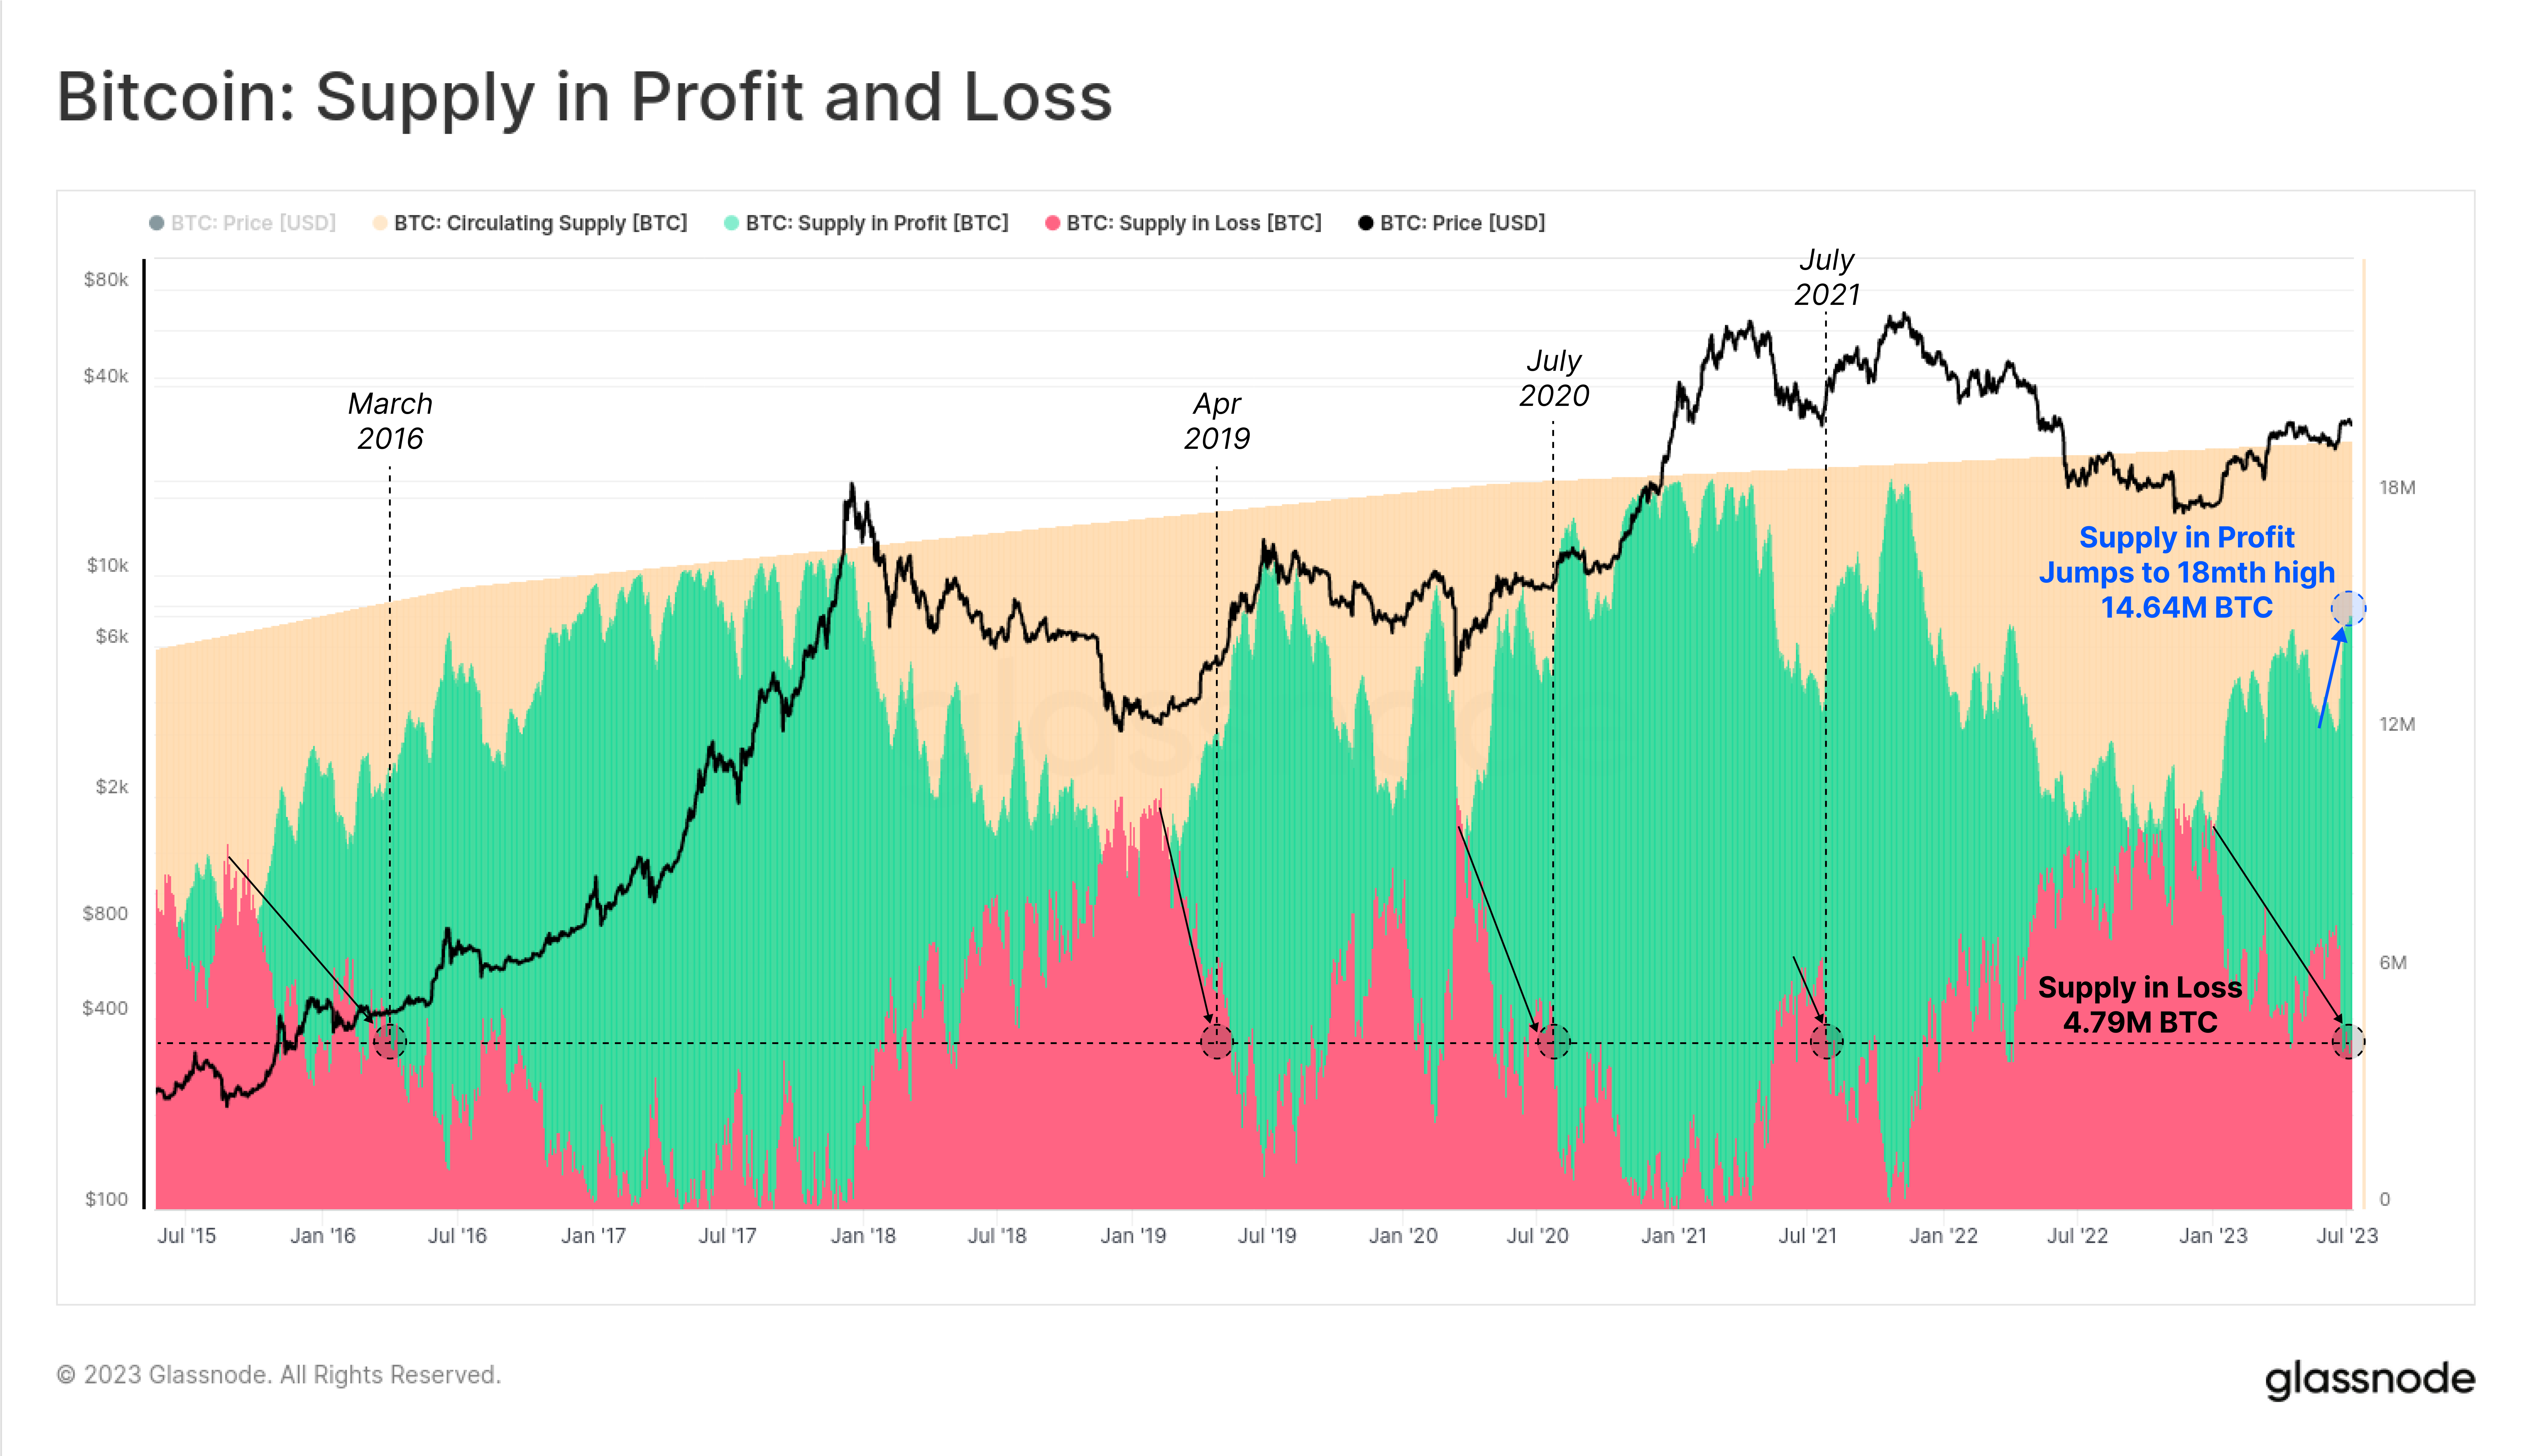 Bitcoin supply in profit and loss